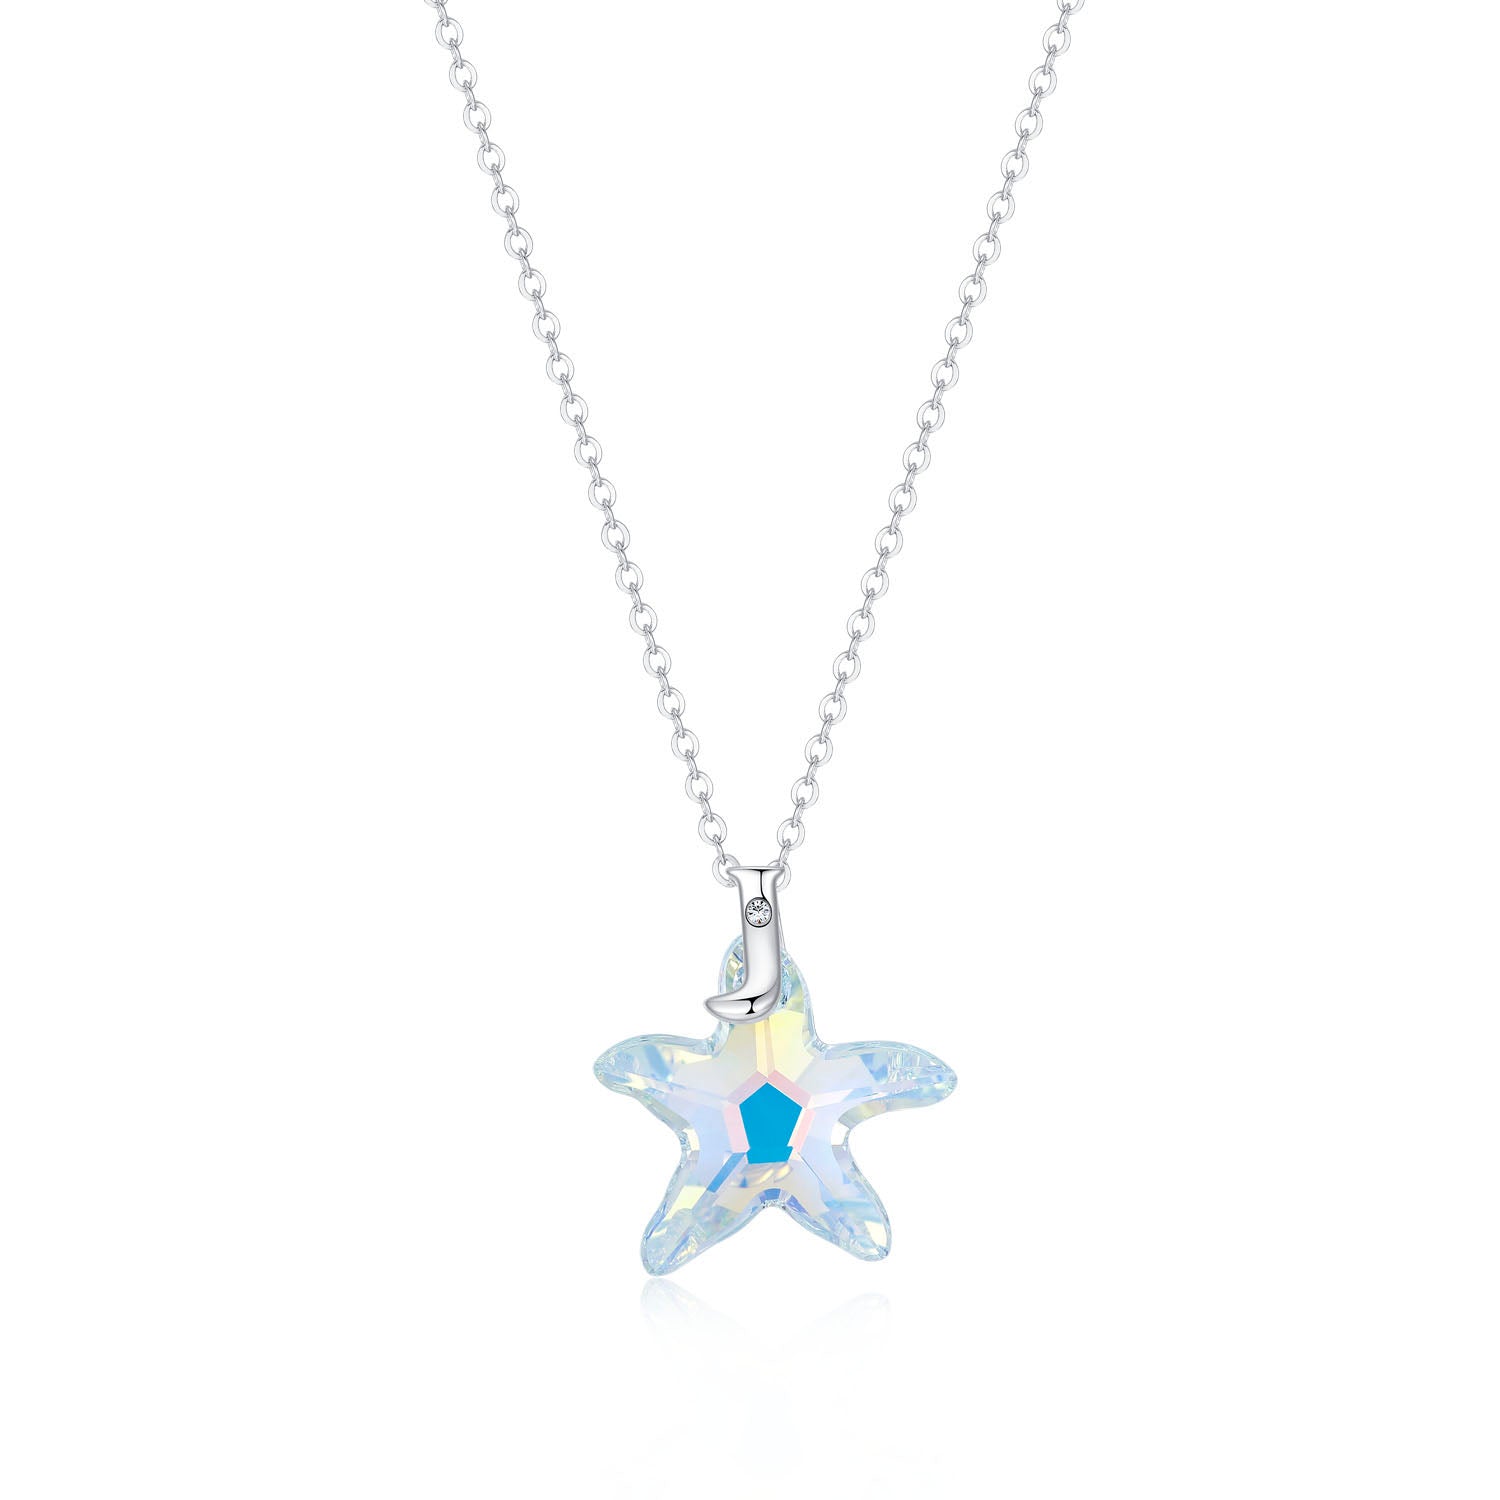 Planet J 925 Sterling Silver Ocean Star Pendant Necklace with Swarovski Elements Crystals